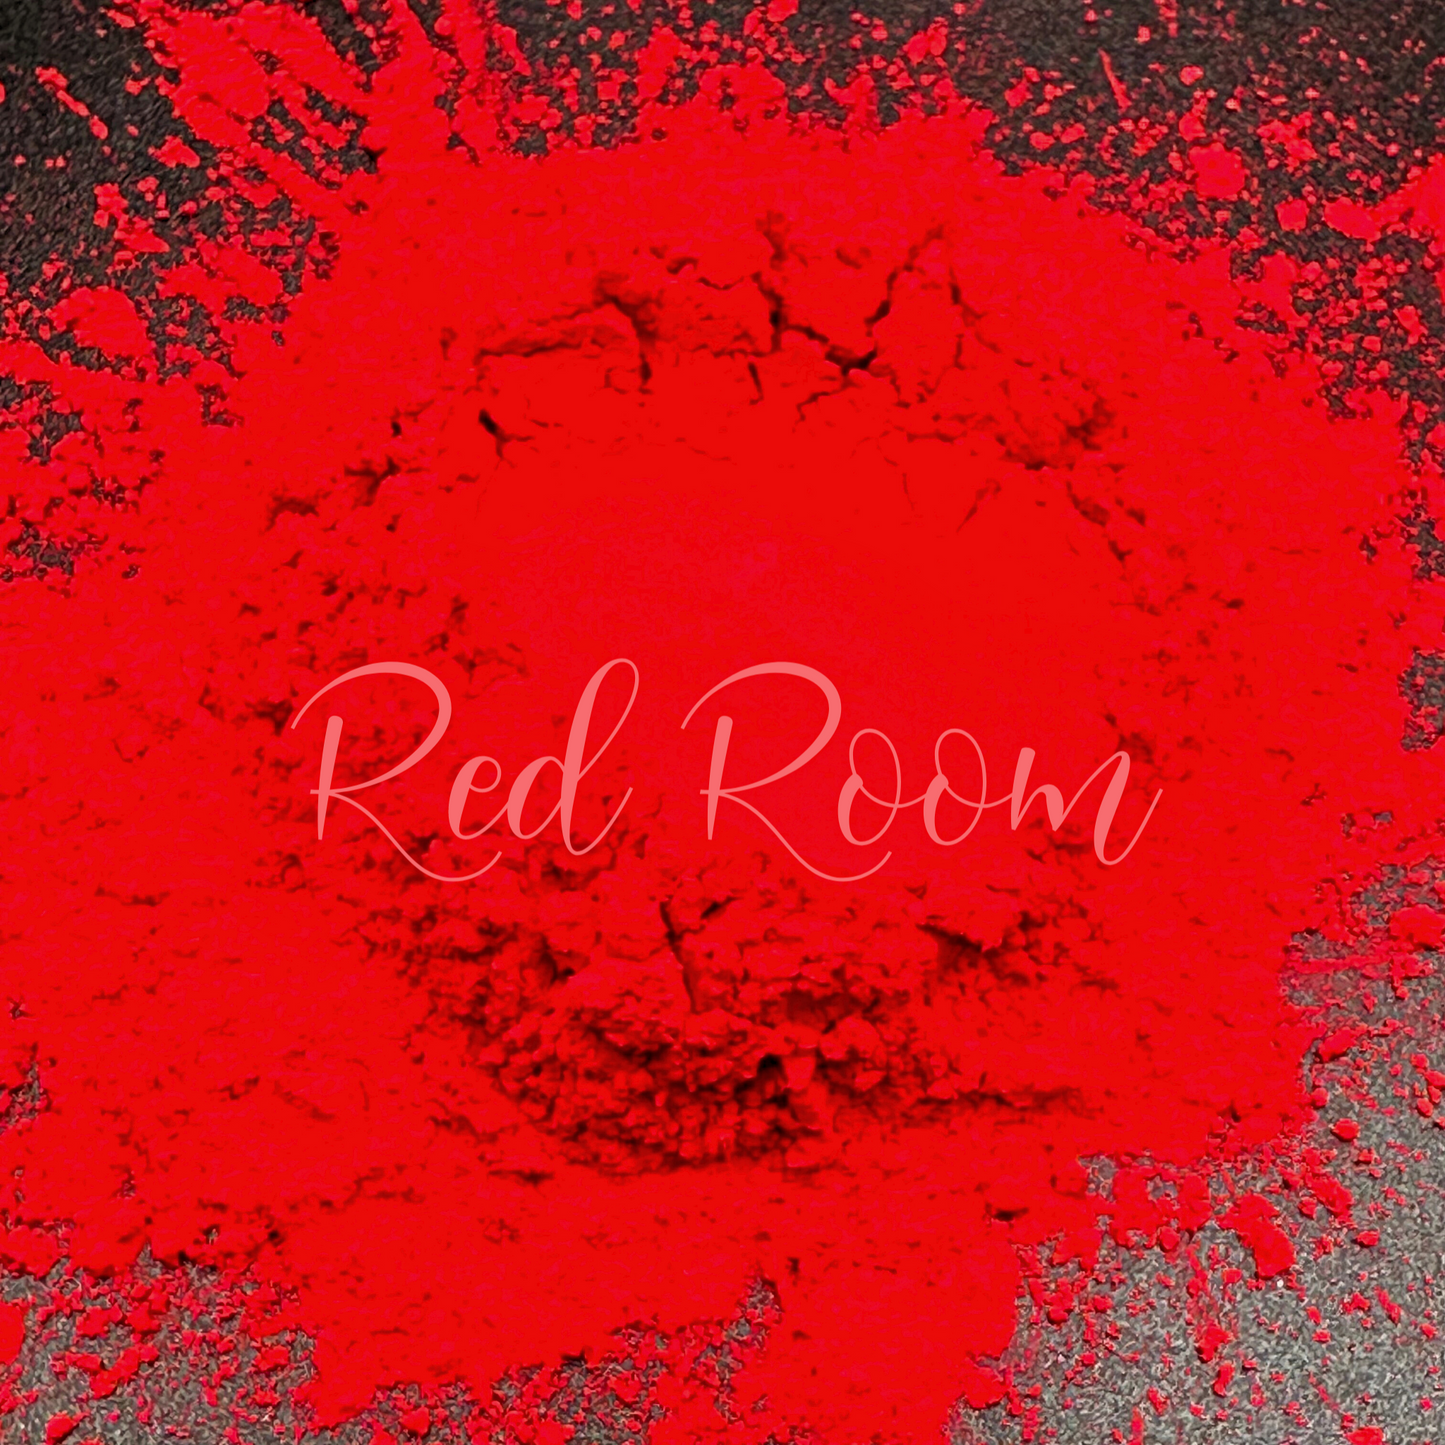 Red Room Neon Mica Powder